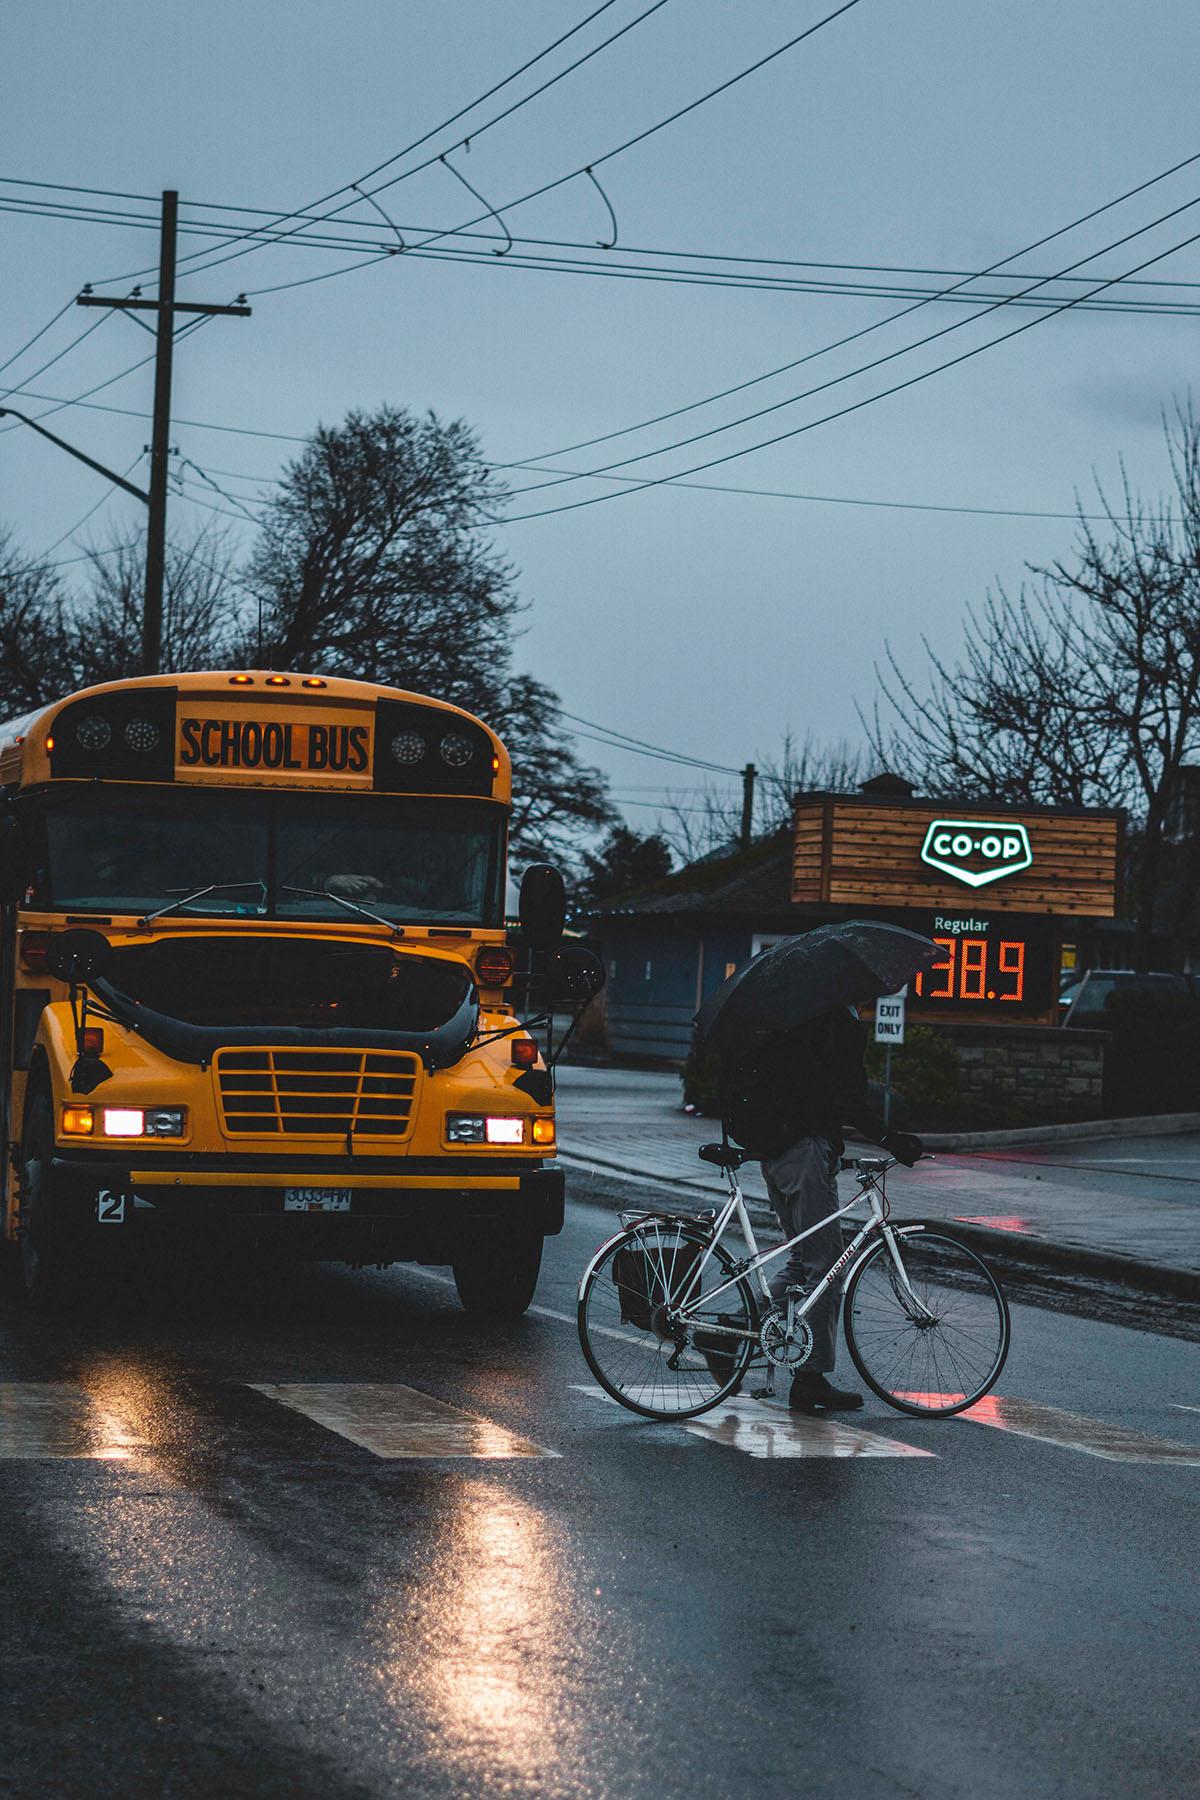 School bus stopped and a person on the crosswalk with a bike and umbrell.